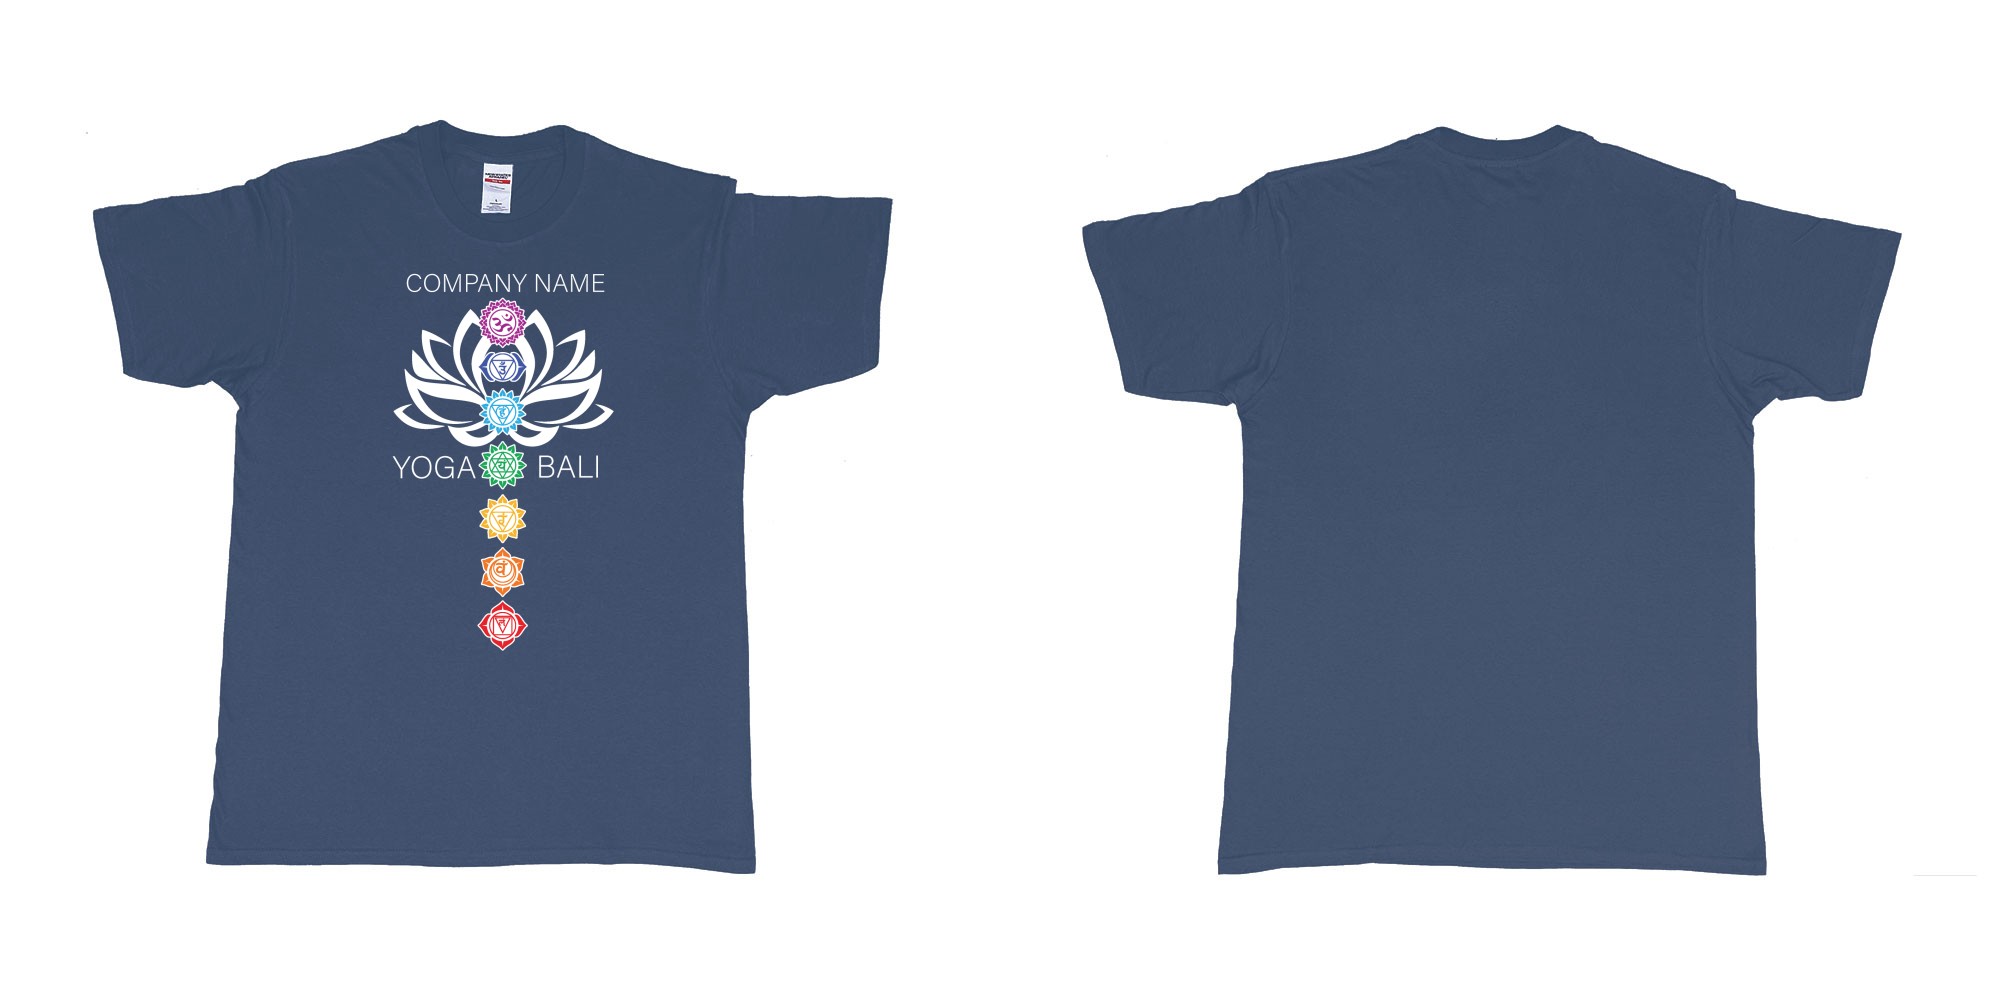 Custom tshirt design lotus flower chakras yoga hindi symbols for custom teeshirt printing in fabric color navy choice your own text made in Bali by The Pirate Way